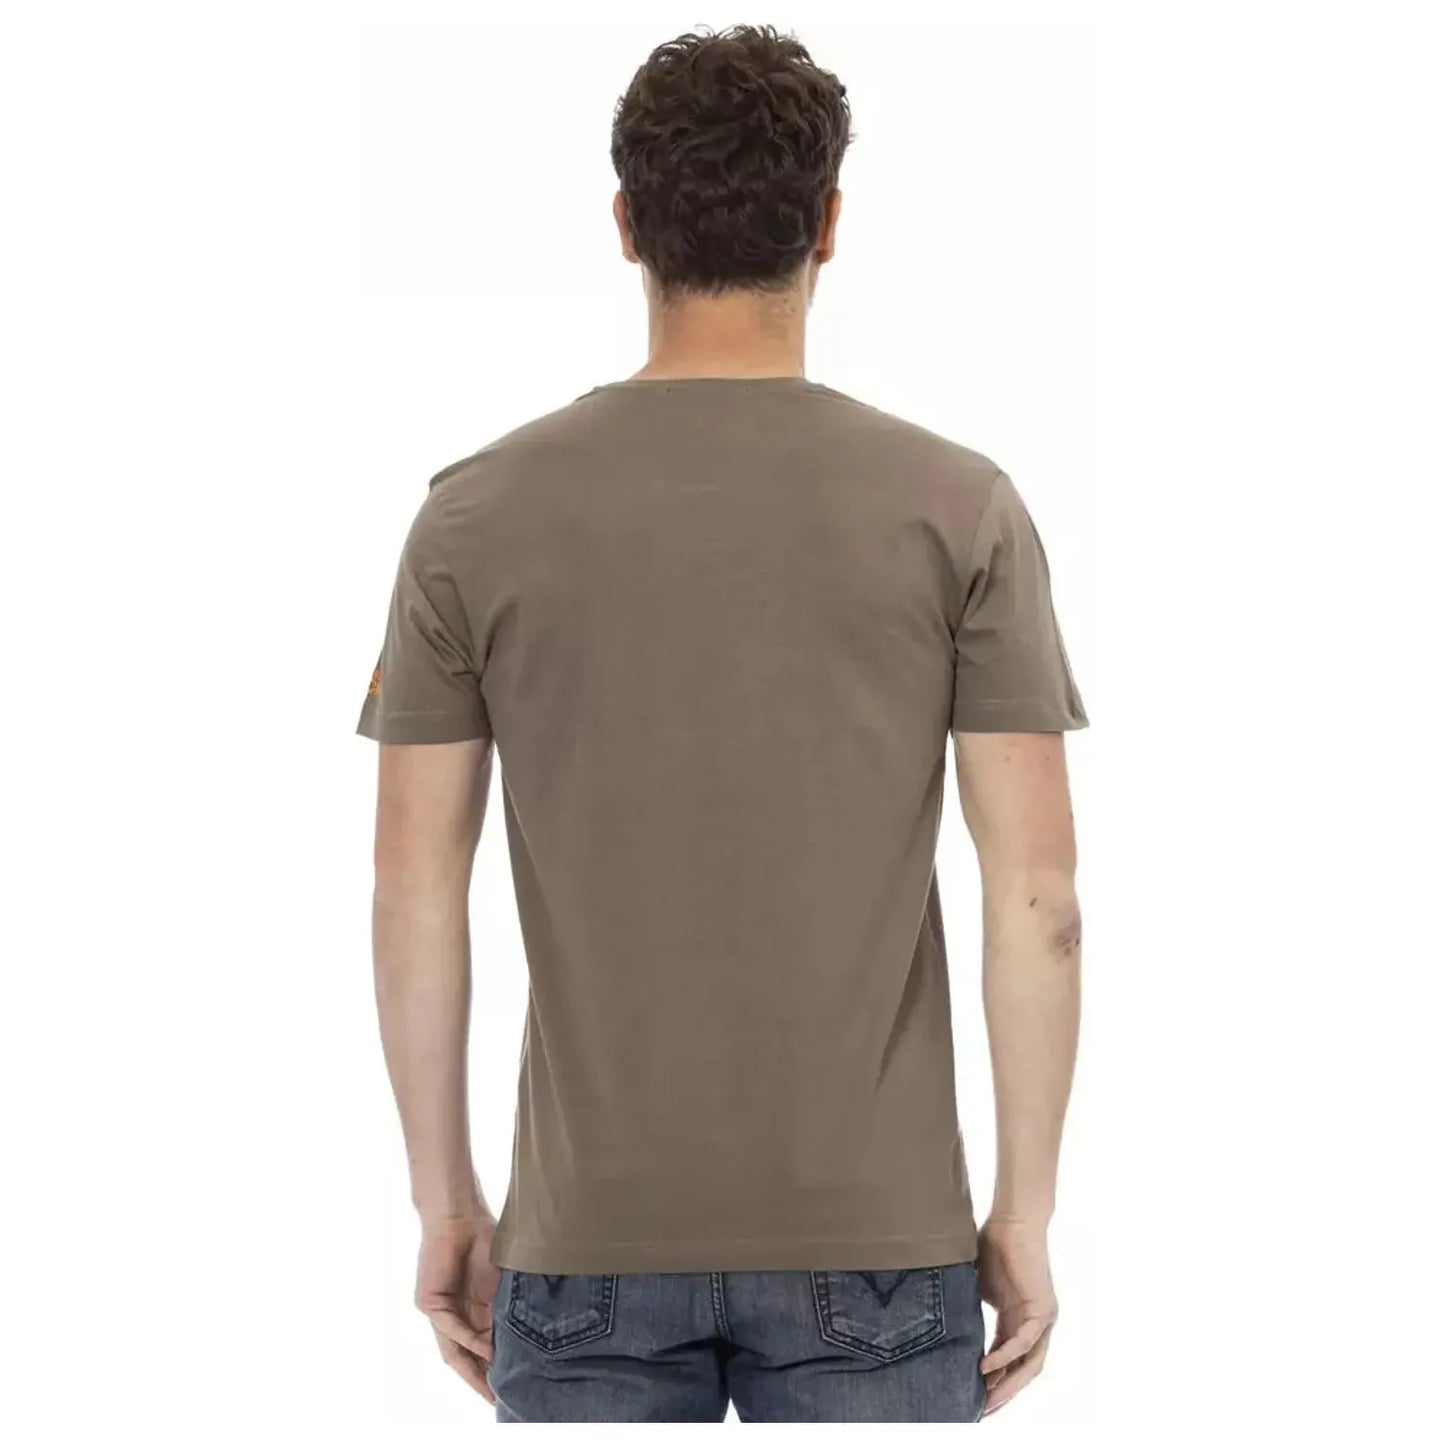 Trussardi Action Elegant Brown Tee with Chic Front Print brown-cotton-t-shirt-6